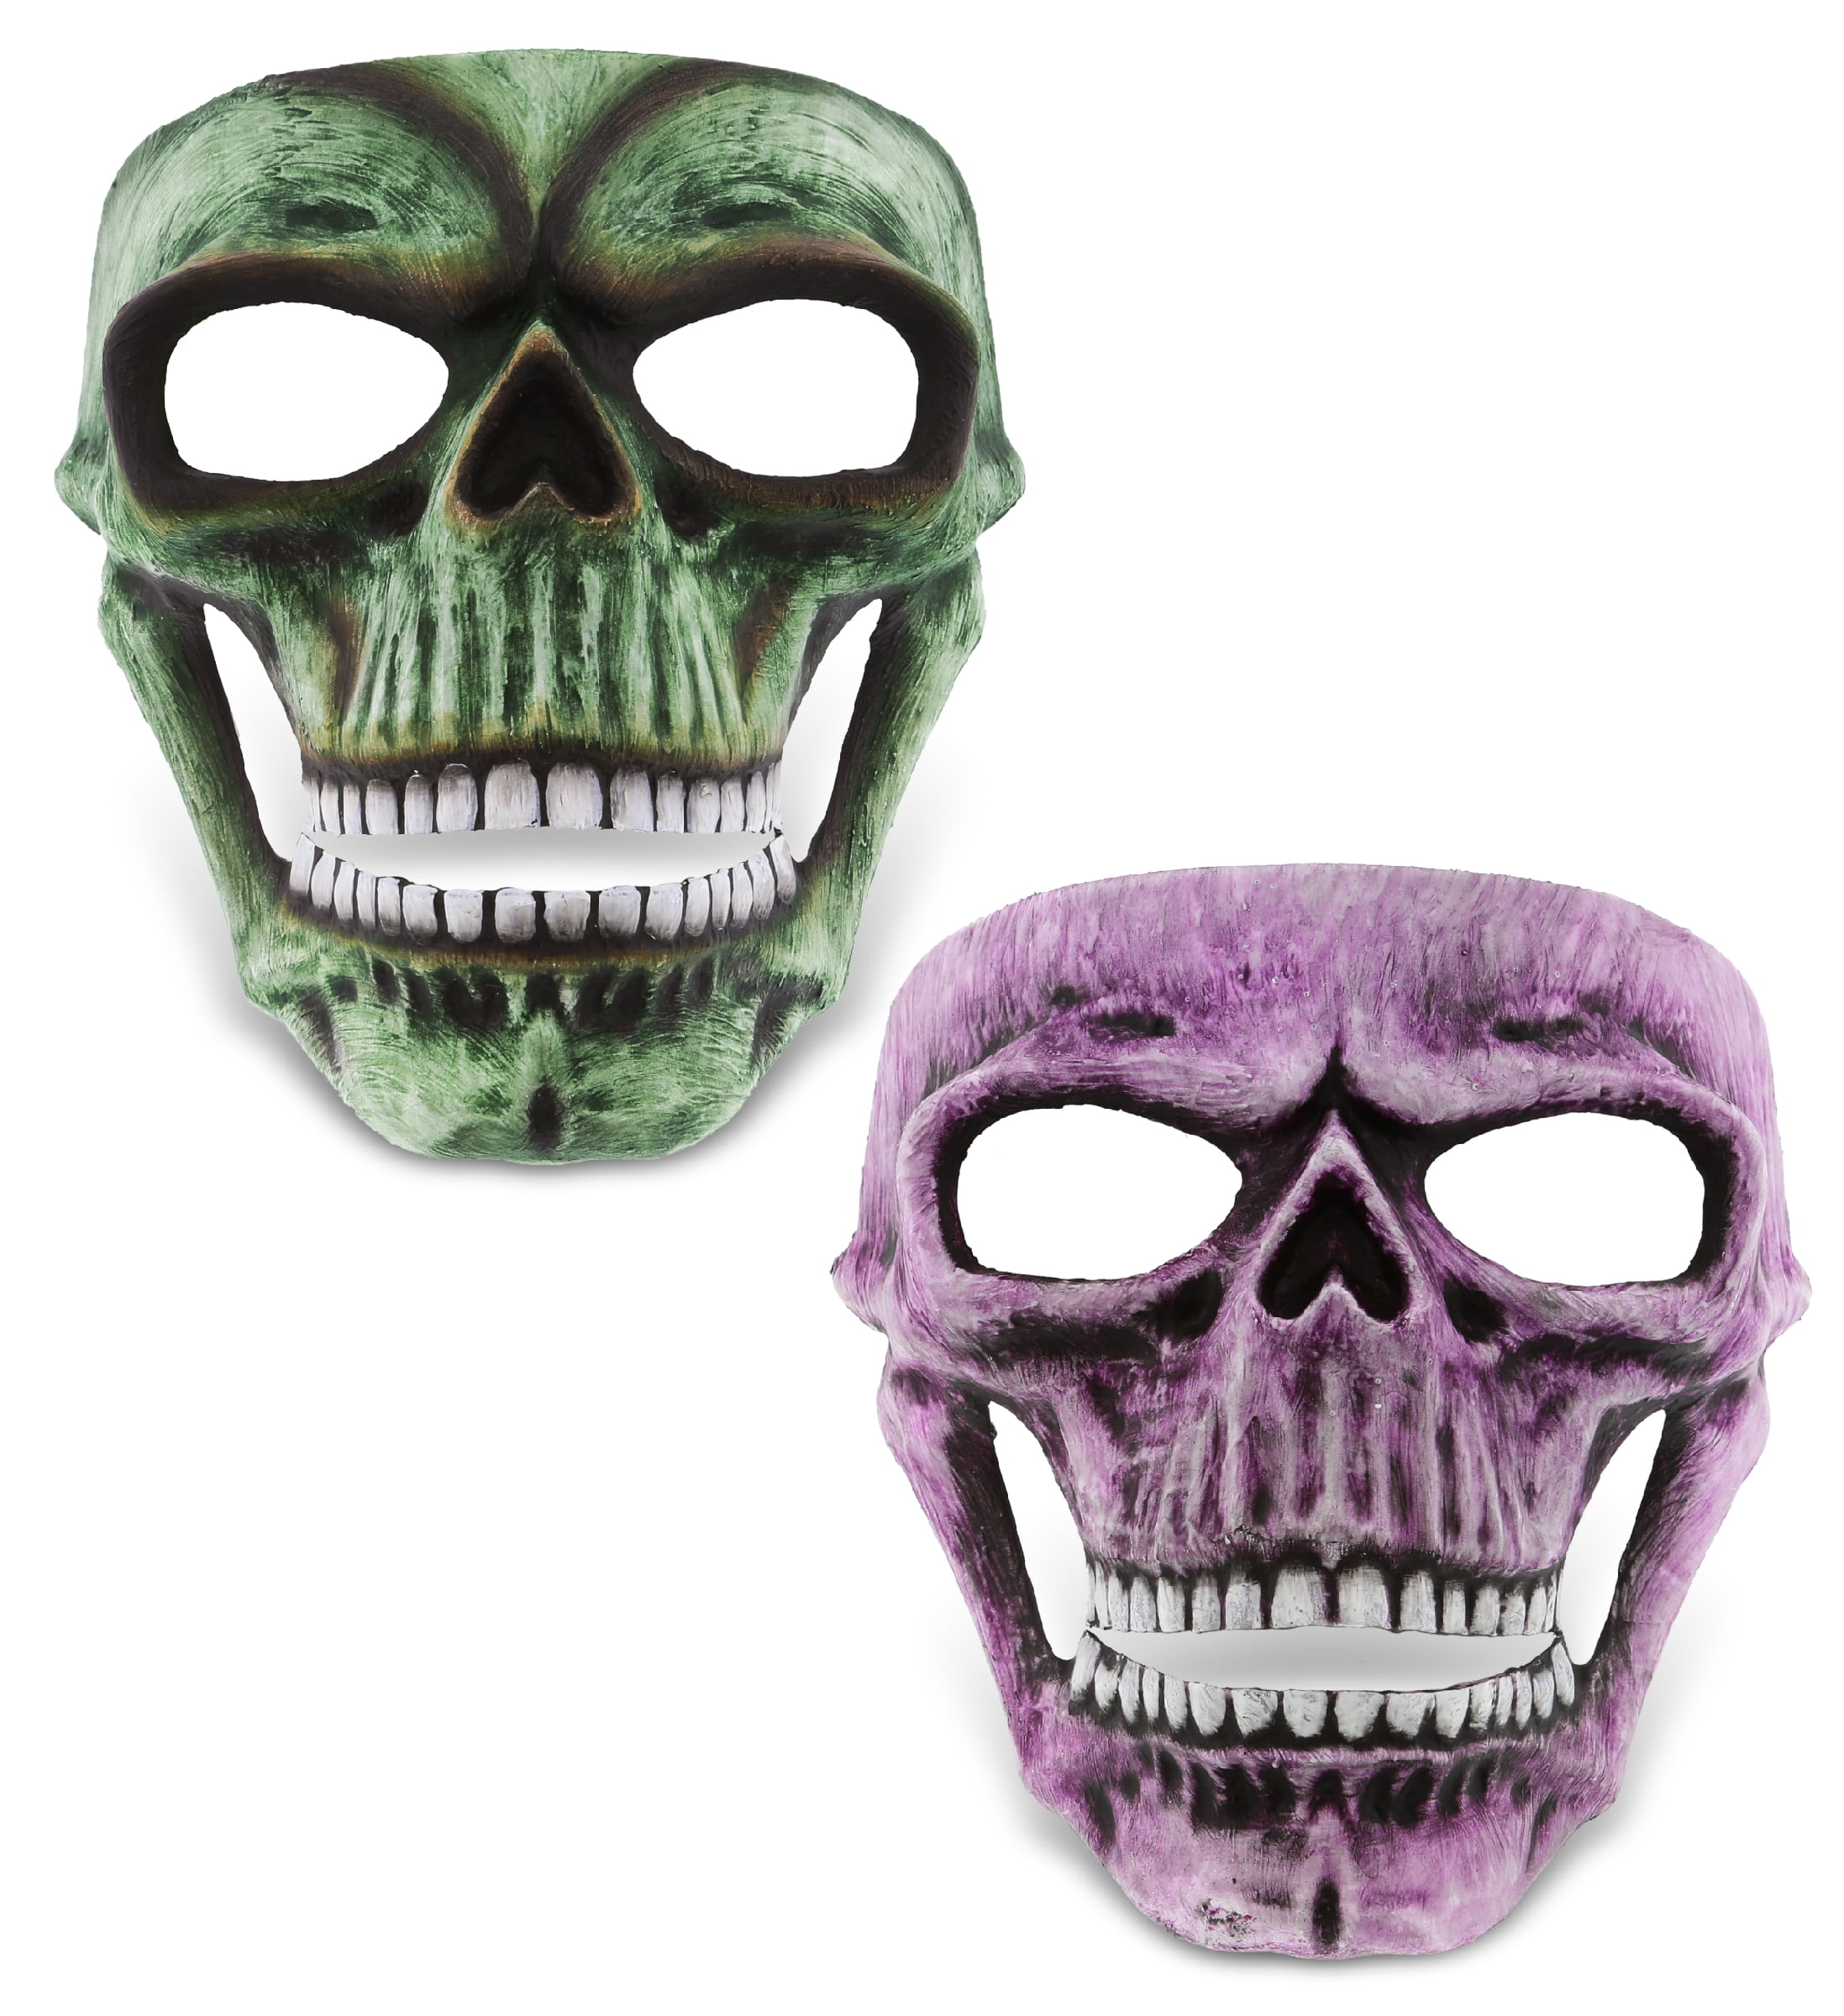 Costume Halloween Party Skull Cover Motorcycle Skeleton Half Face Cover Gear 